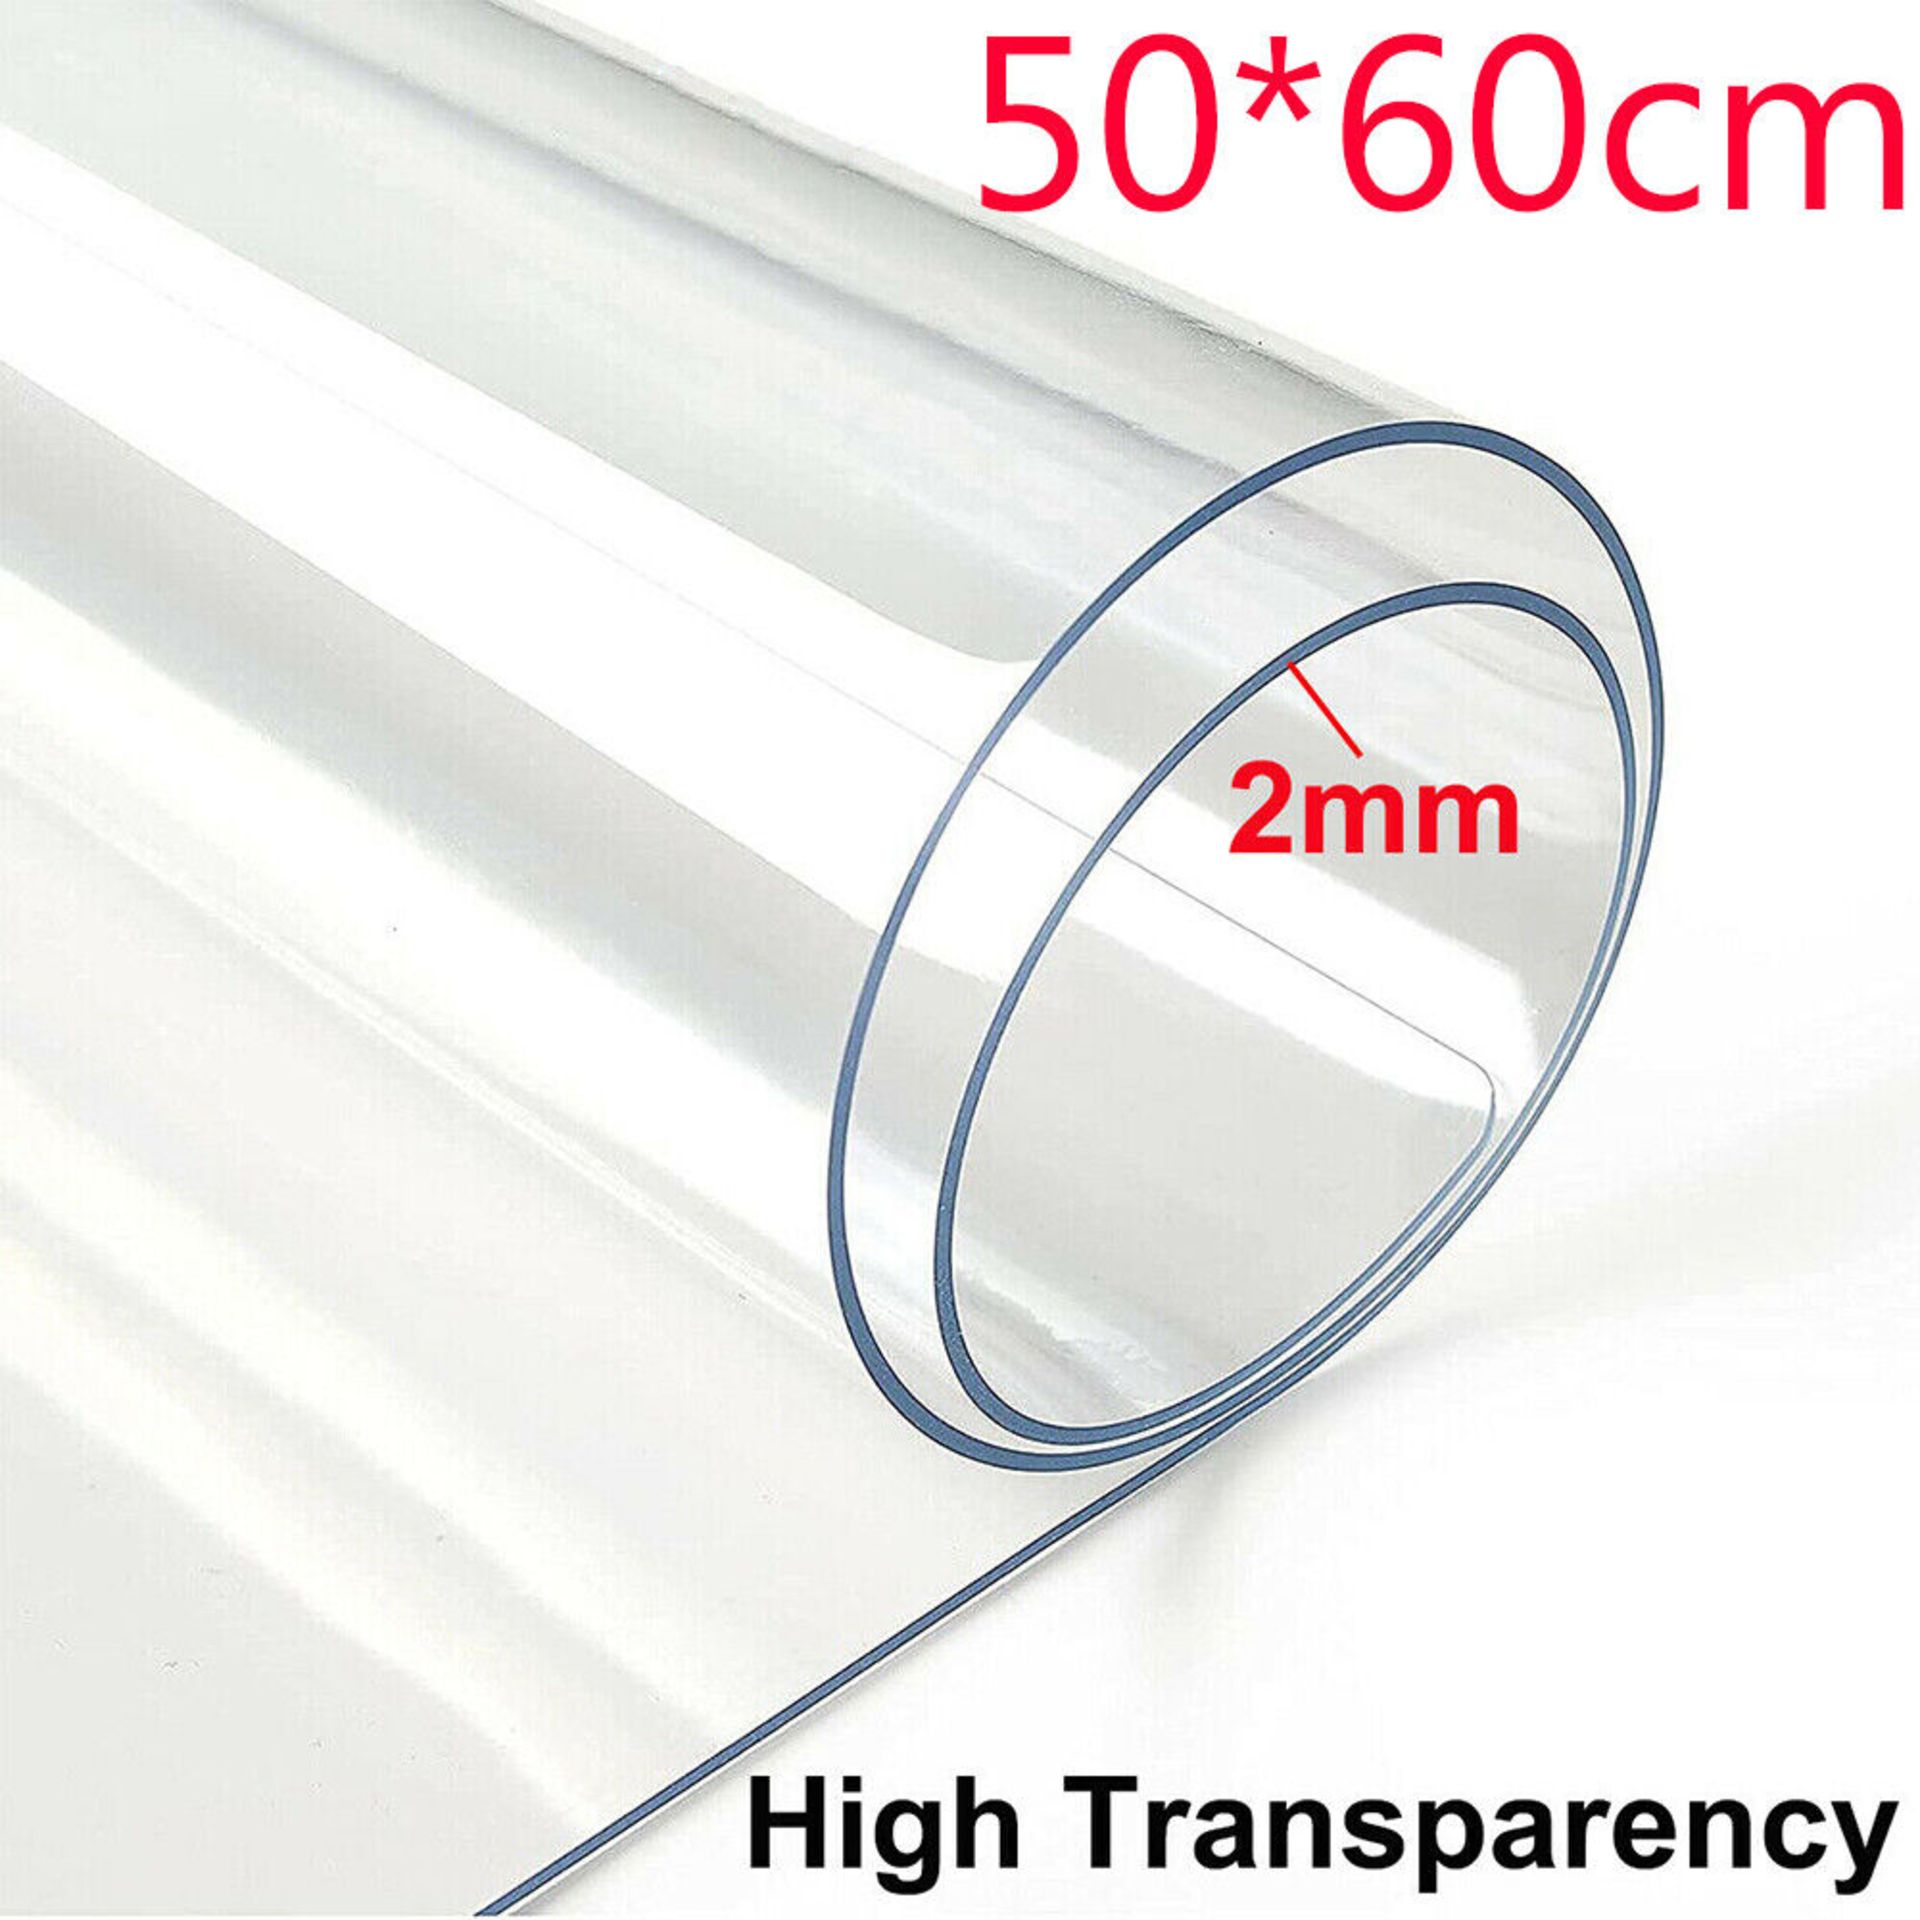 TRADE LOT OF 100 CLEAR TRANSPARENT VINYL PVC TABLECLOTH TABLE PROTECTOR COVER